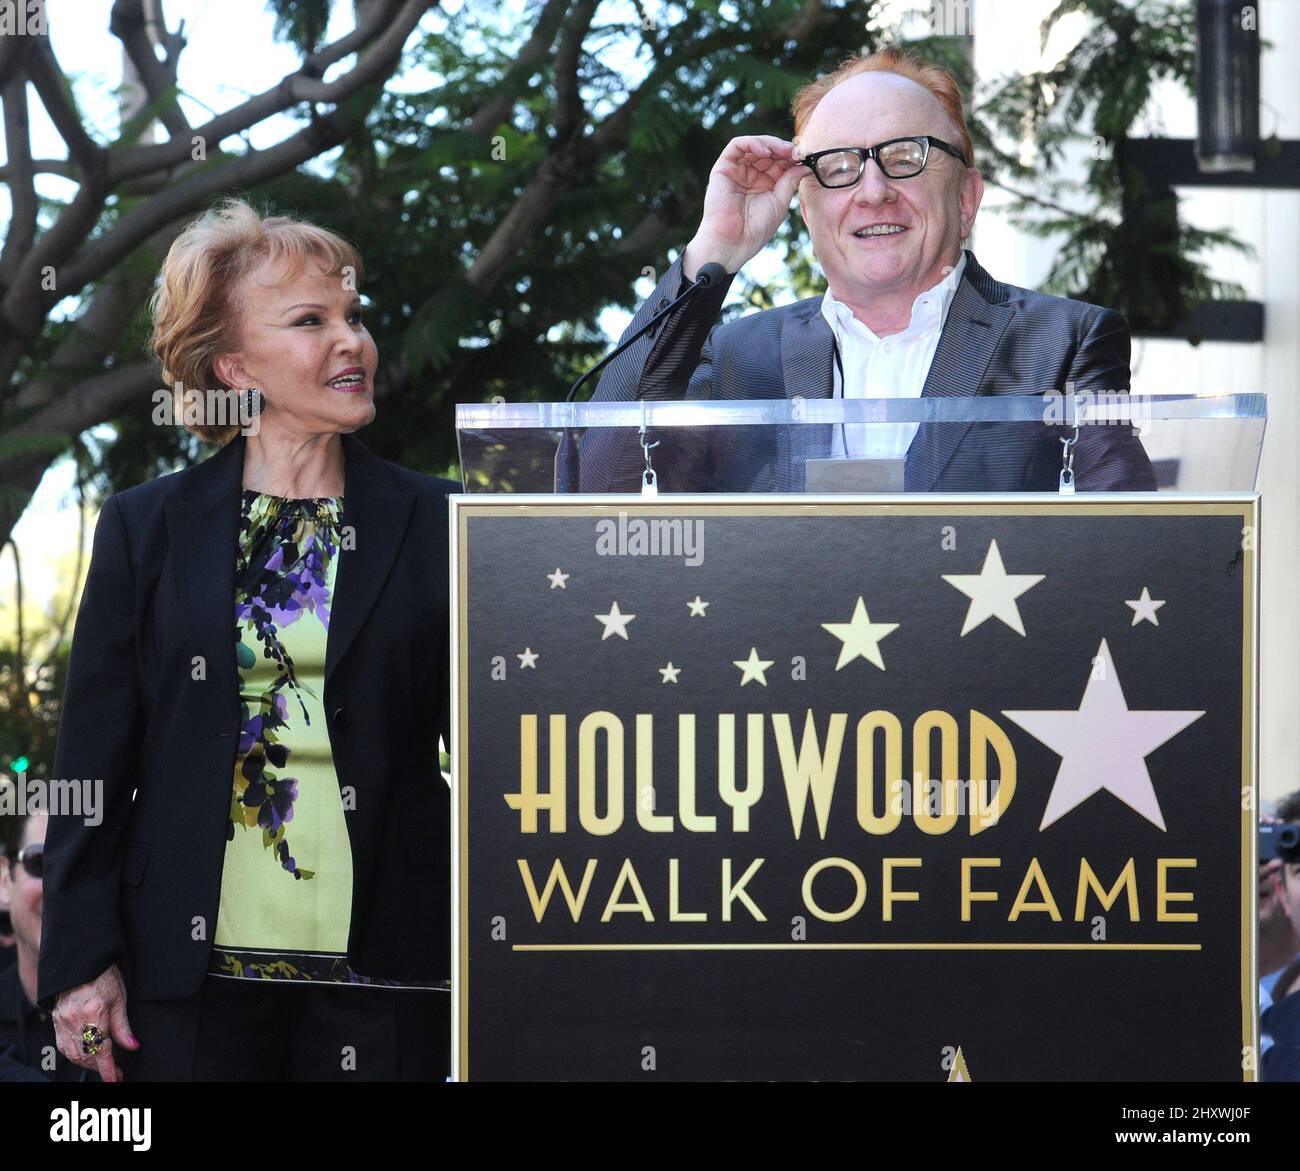 Maria Elena Holly and Peter Asher as Buddy Holly is honored on the Hollywood Walk of Fame in front of the Capital Records Building, Hollywood, California on September 07, 2011. Stock Photo